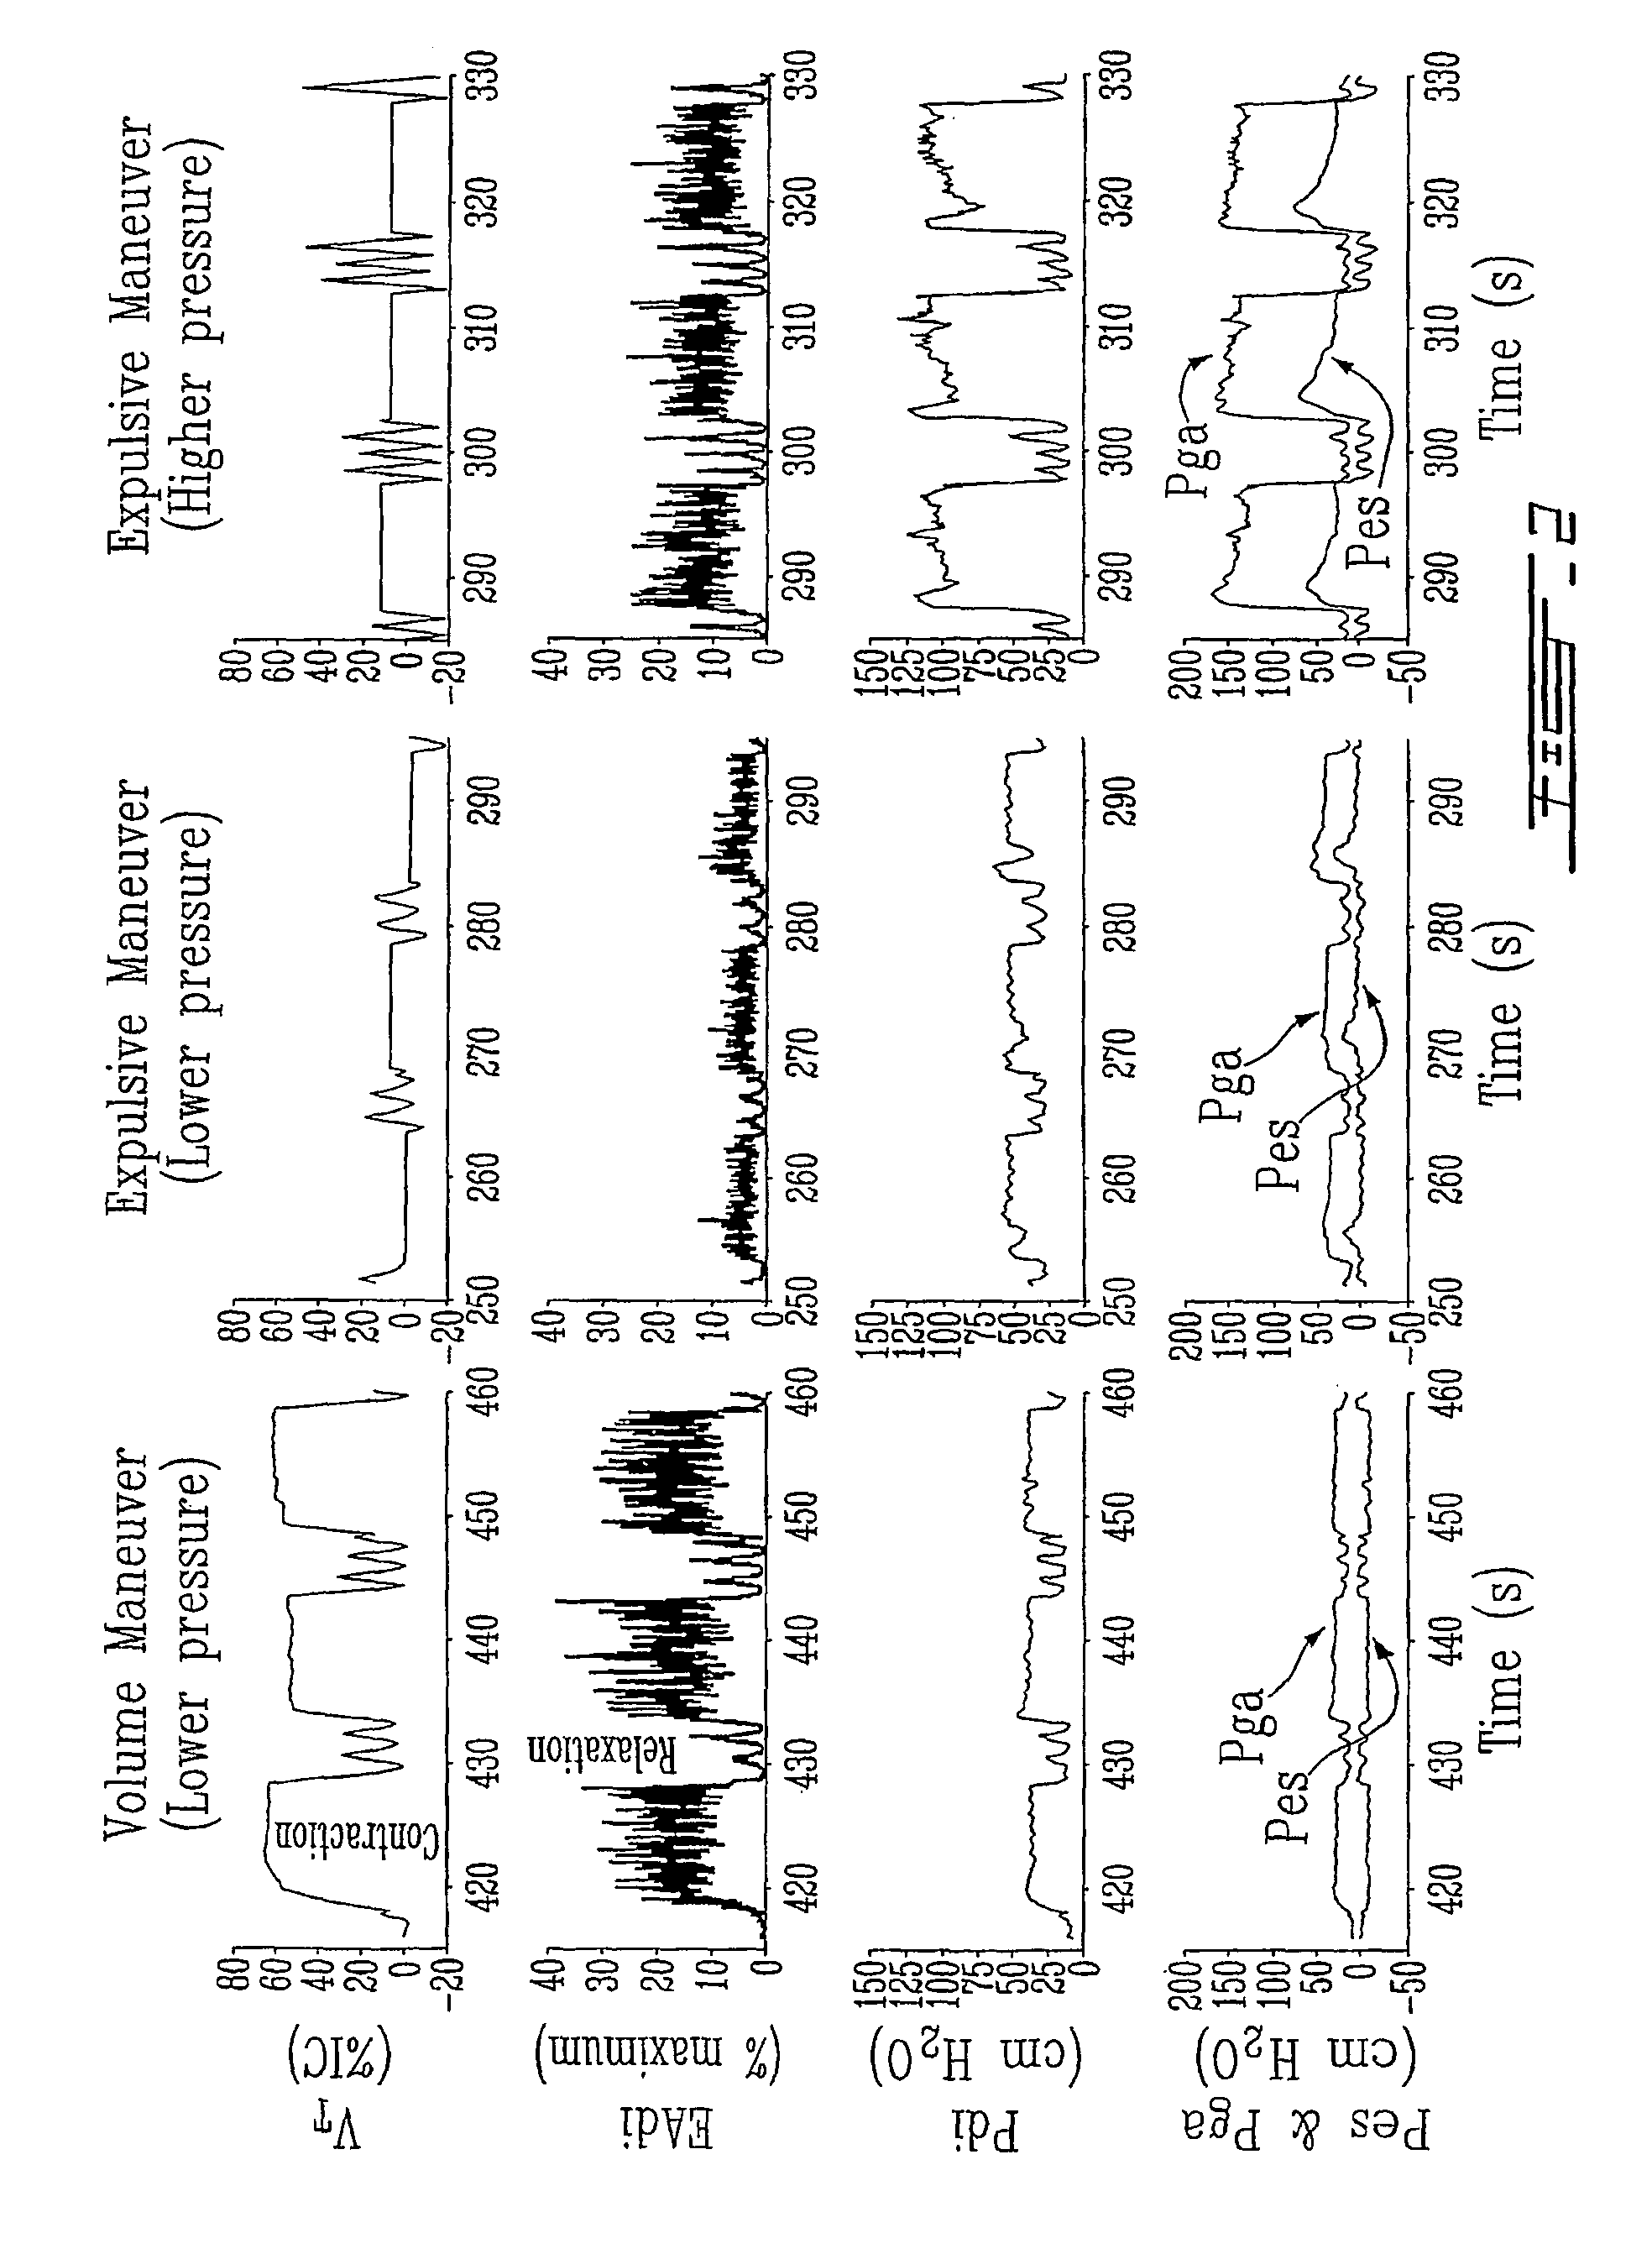 Method and device using myoelectrical activity for optimizing a patient's ventilatory assist